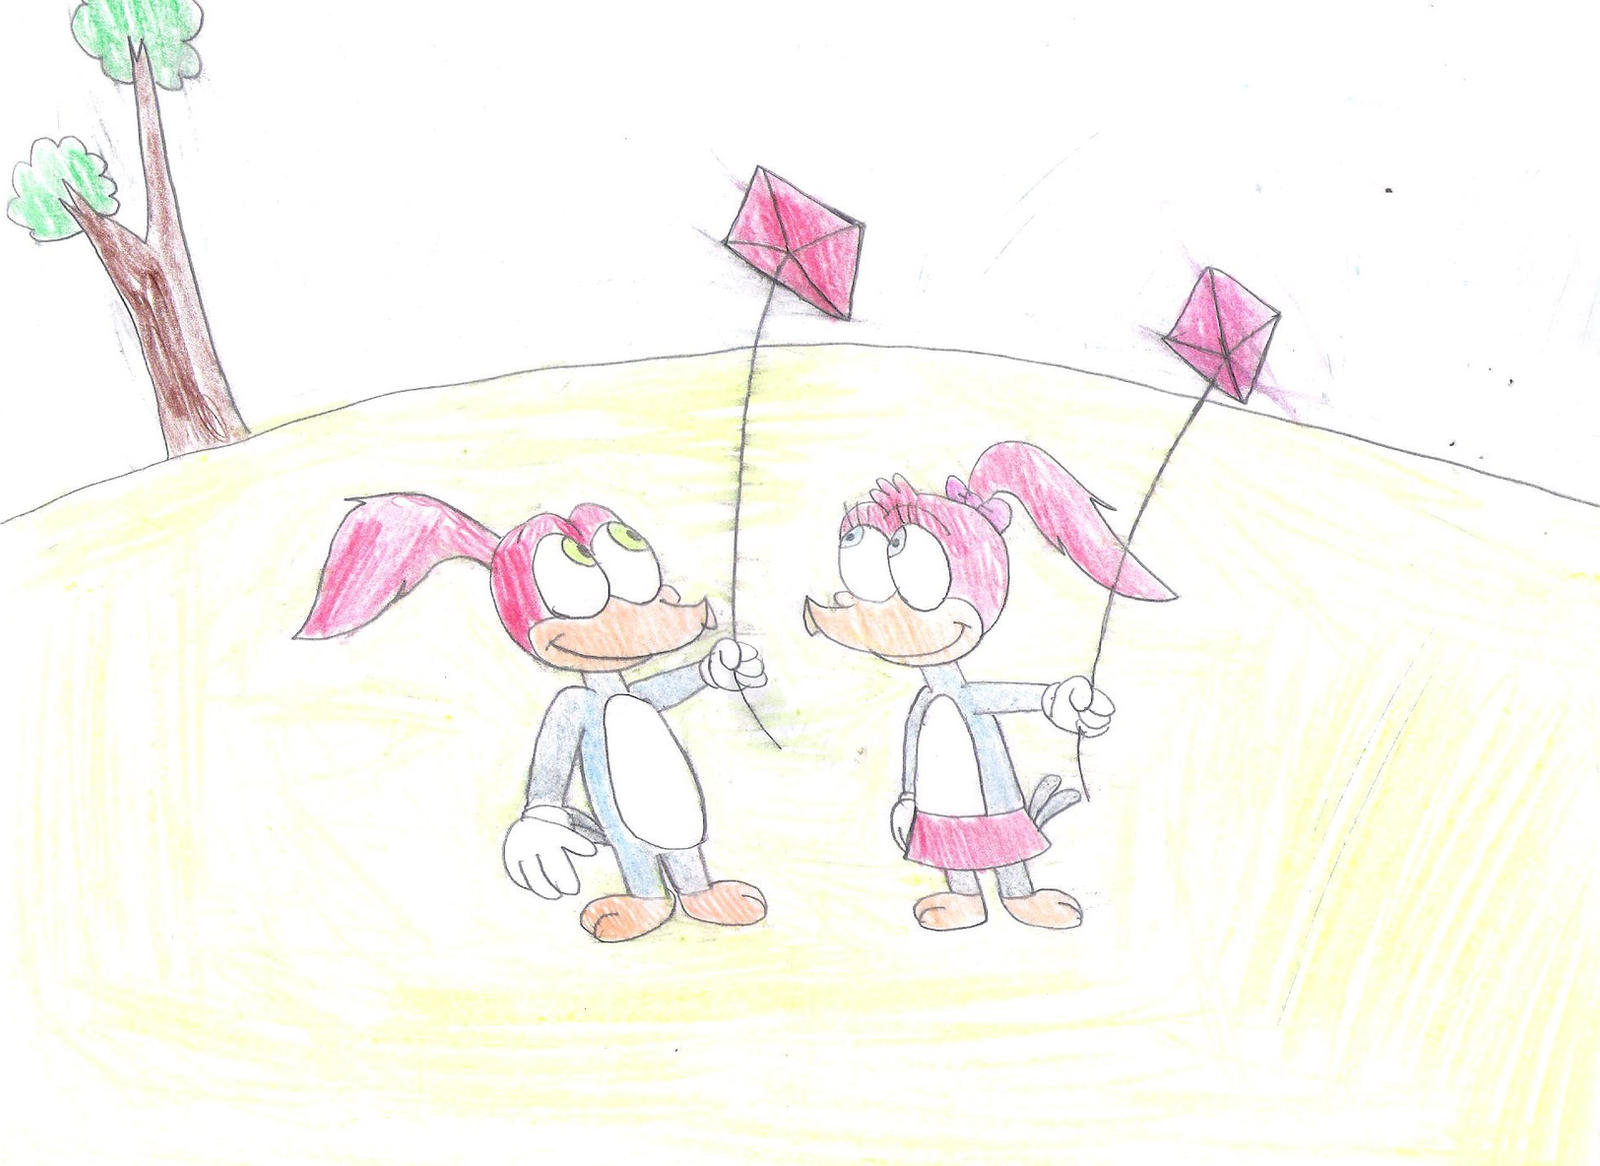 Knothead and Splinter with kites